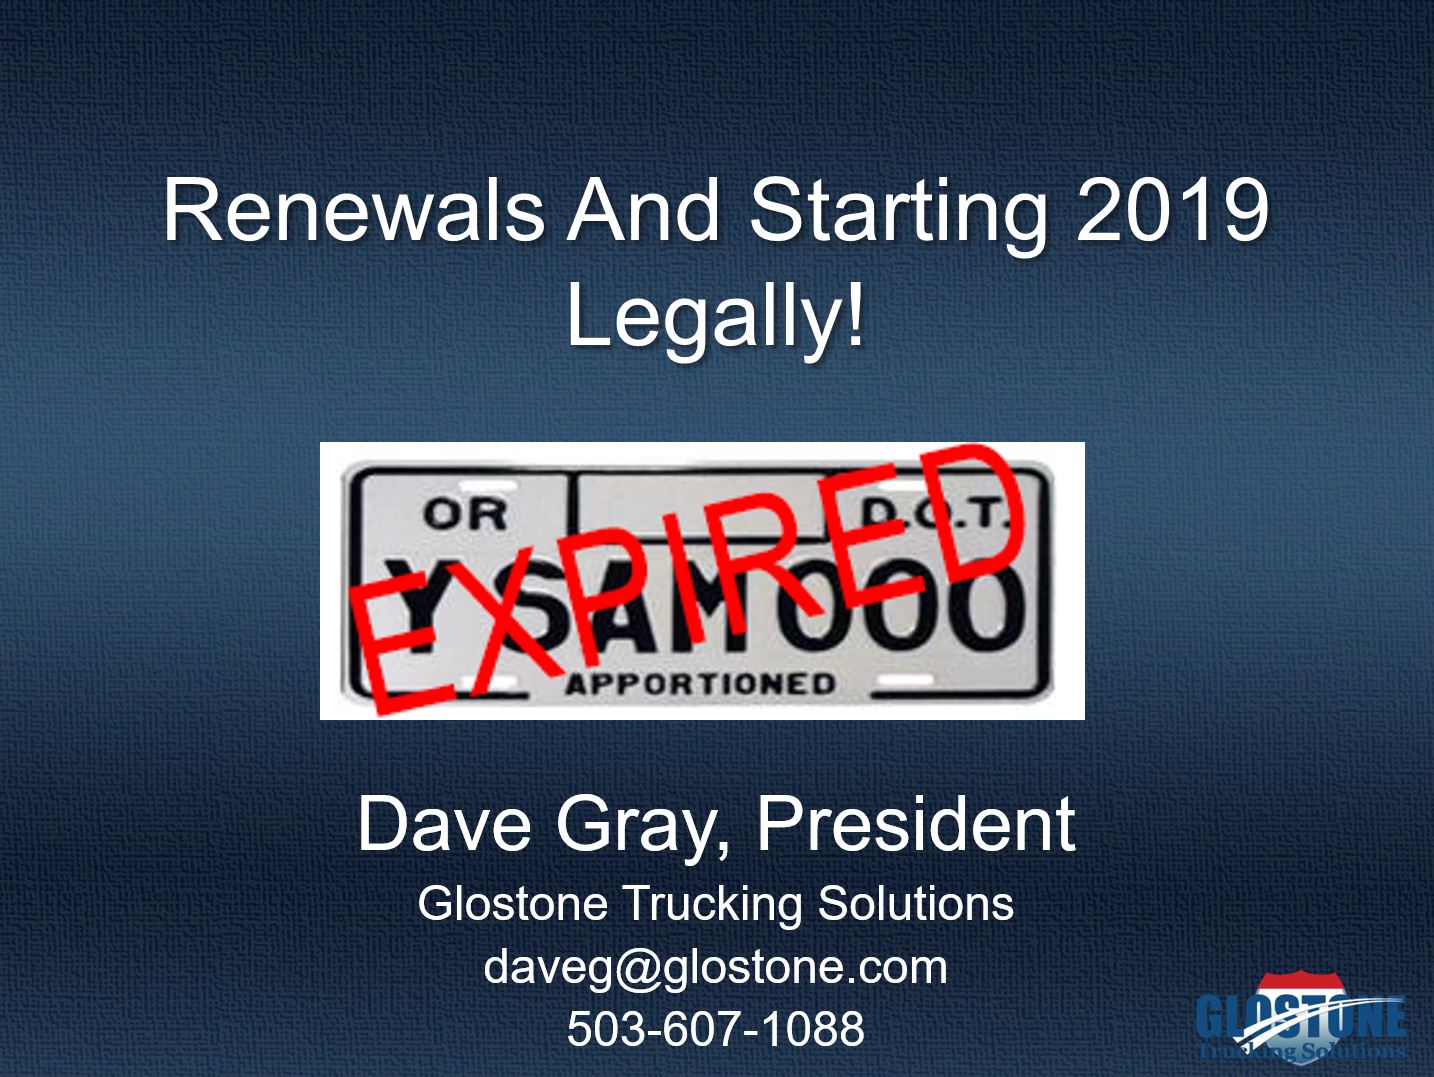 October 2018 webinar: Changes to Renewals and Starting 2019 Legally